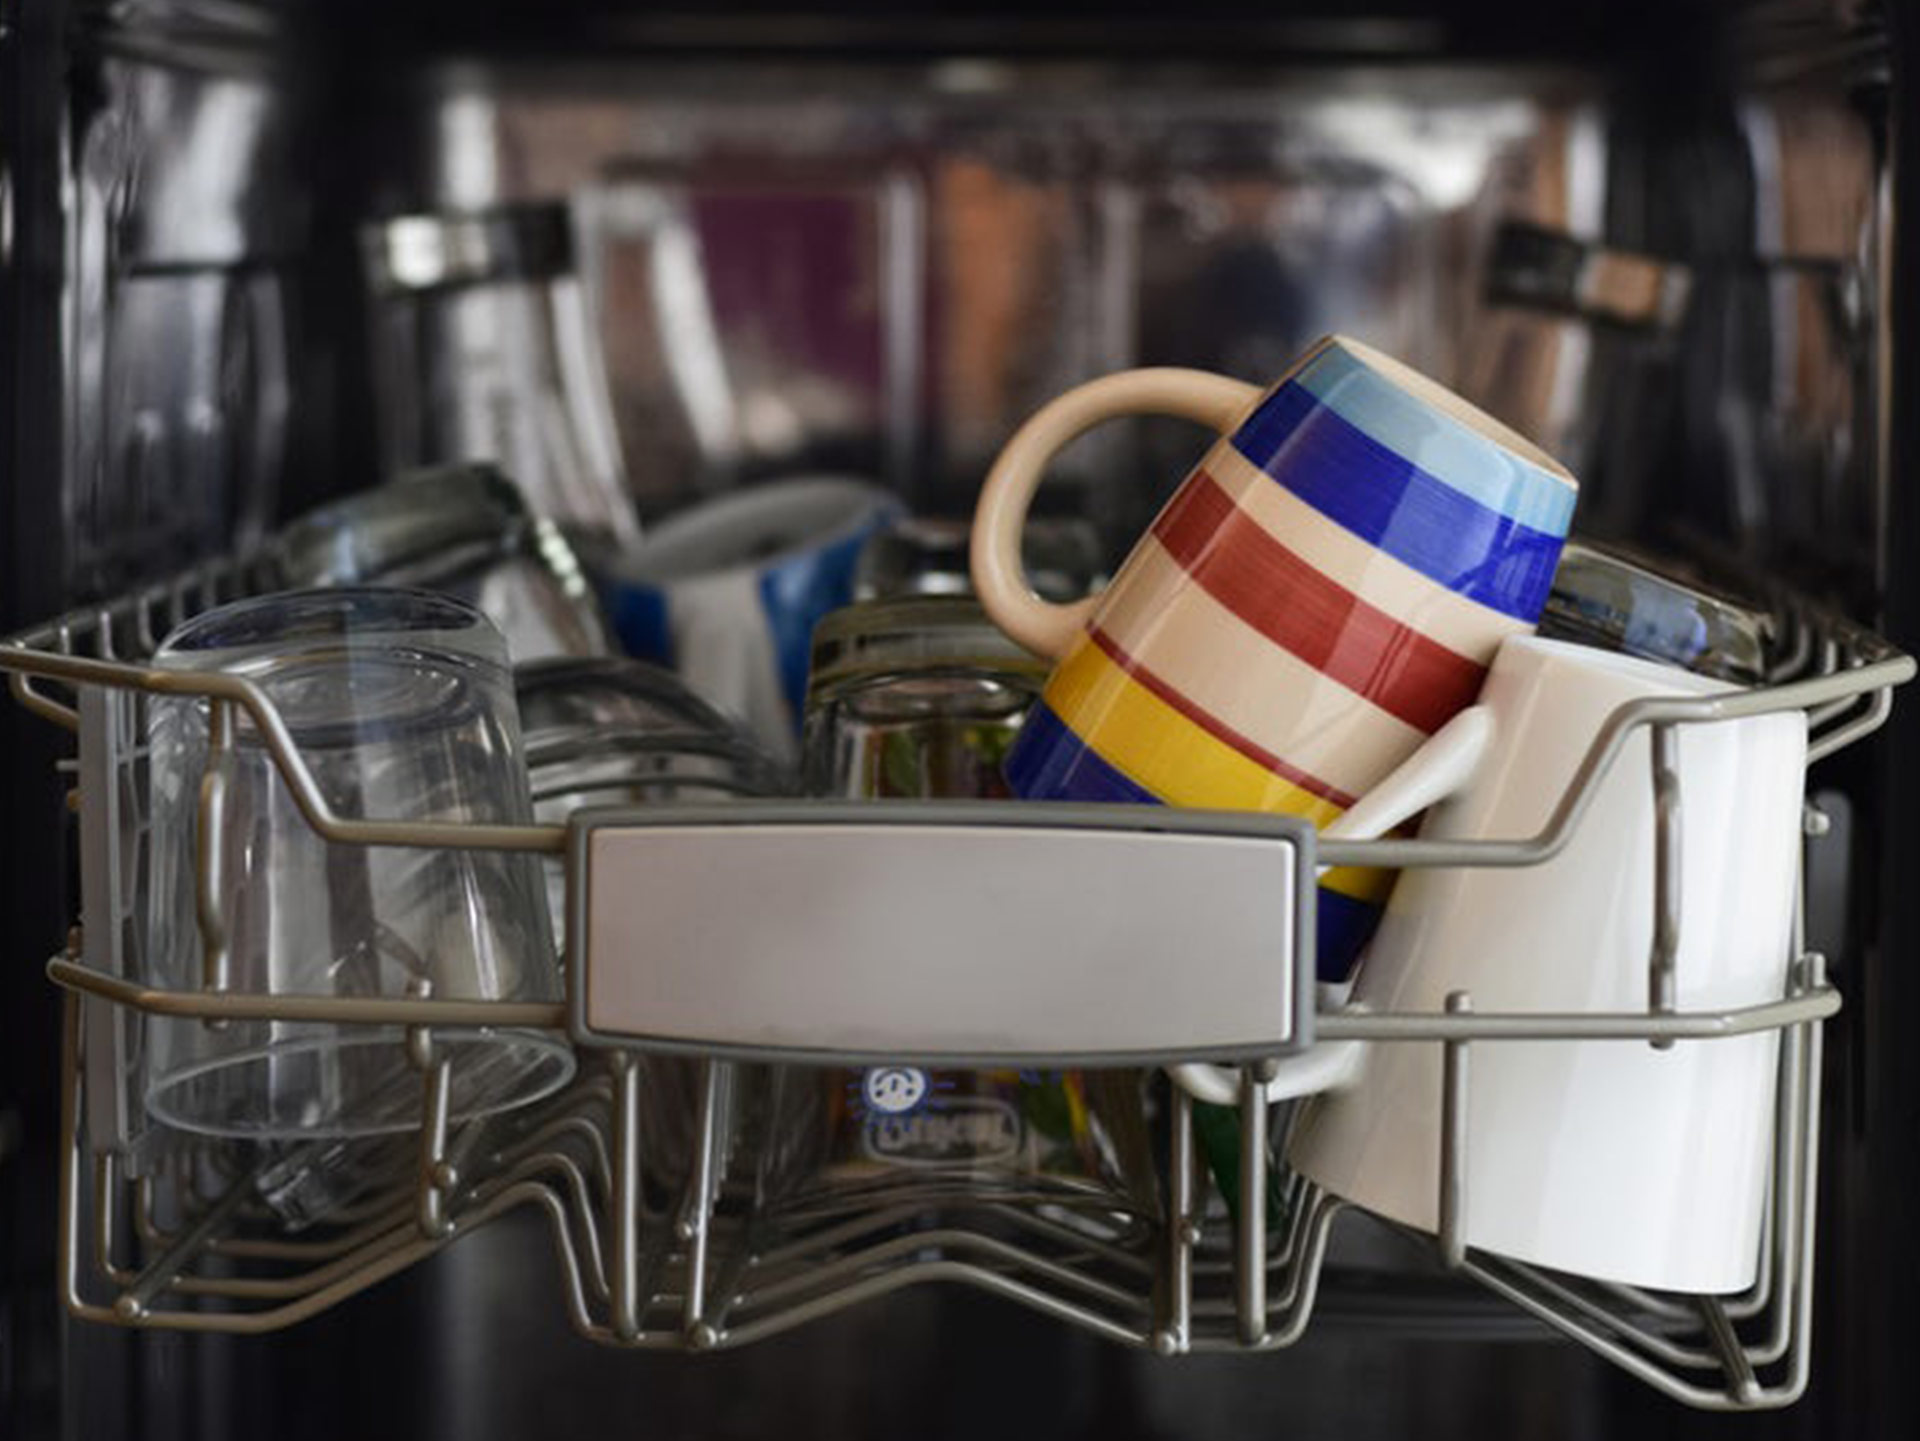 5 things you should never put in the dishwasher